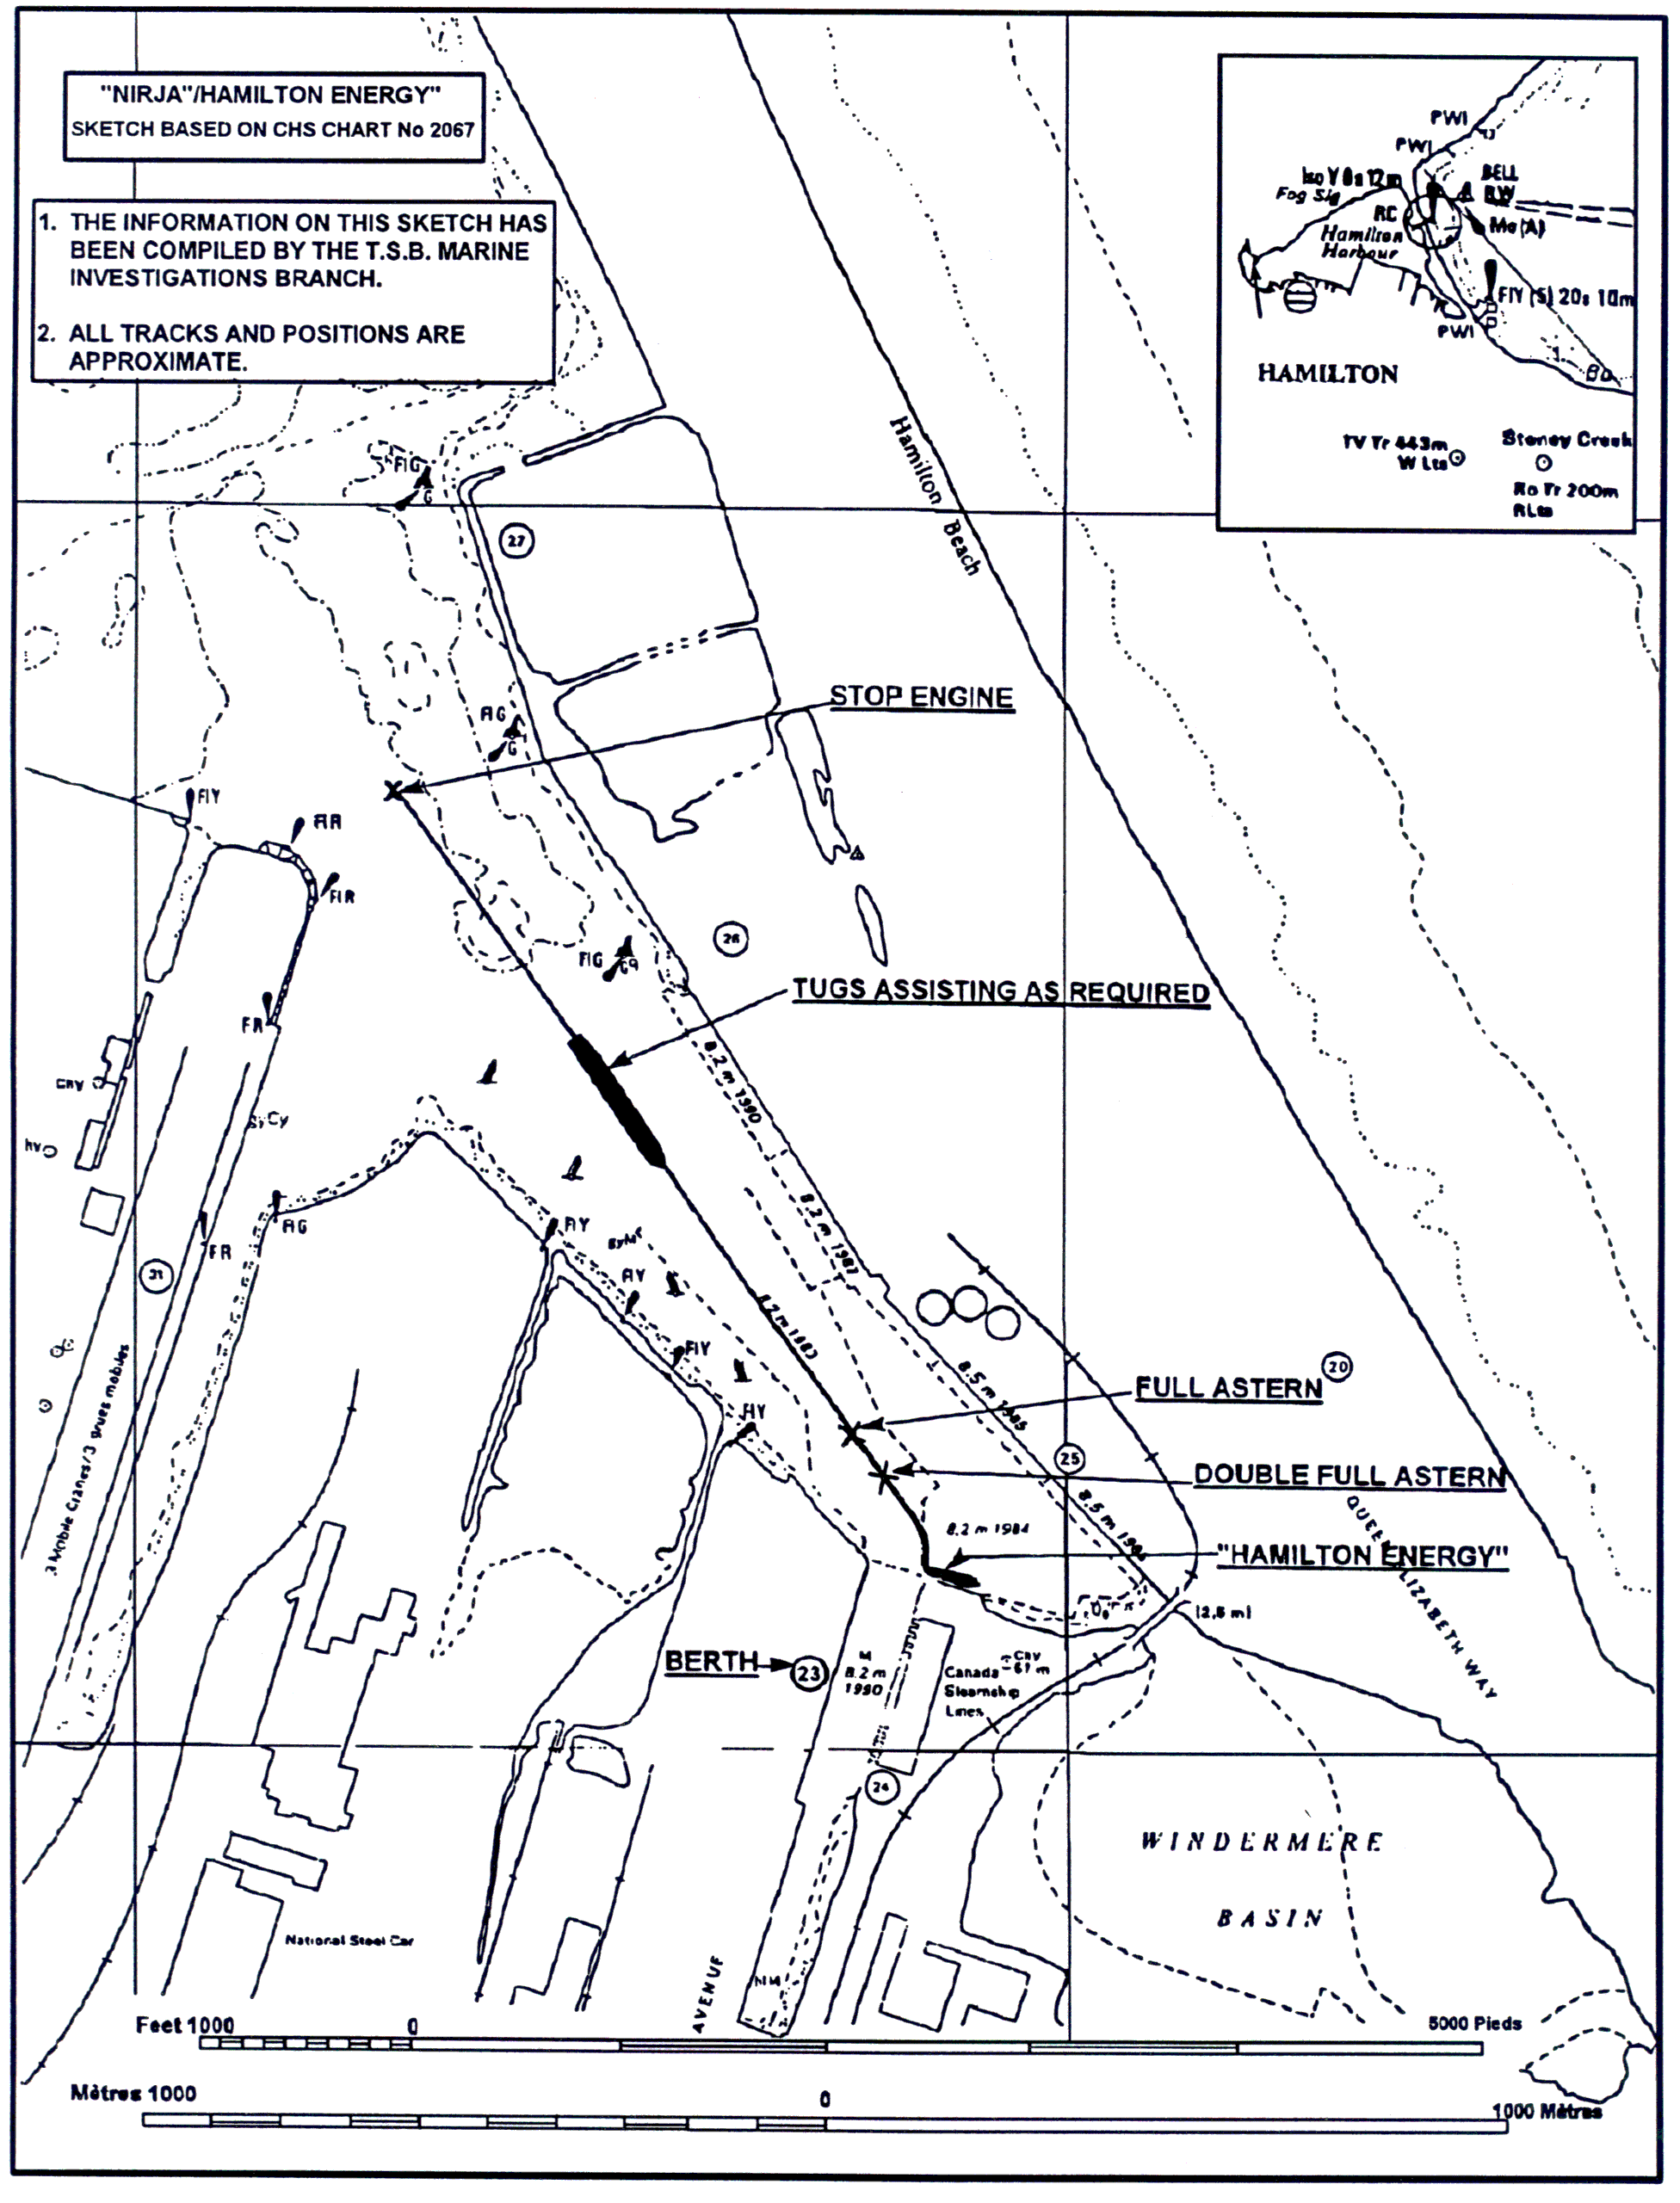 Sketch of the Area of the Occurrence